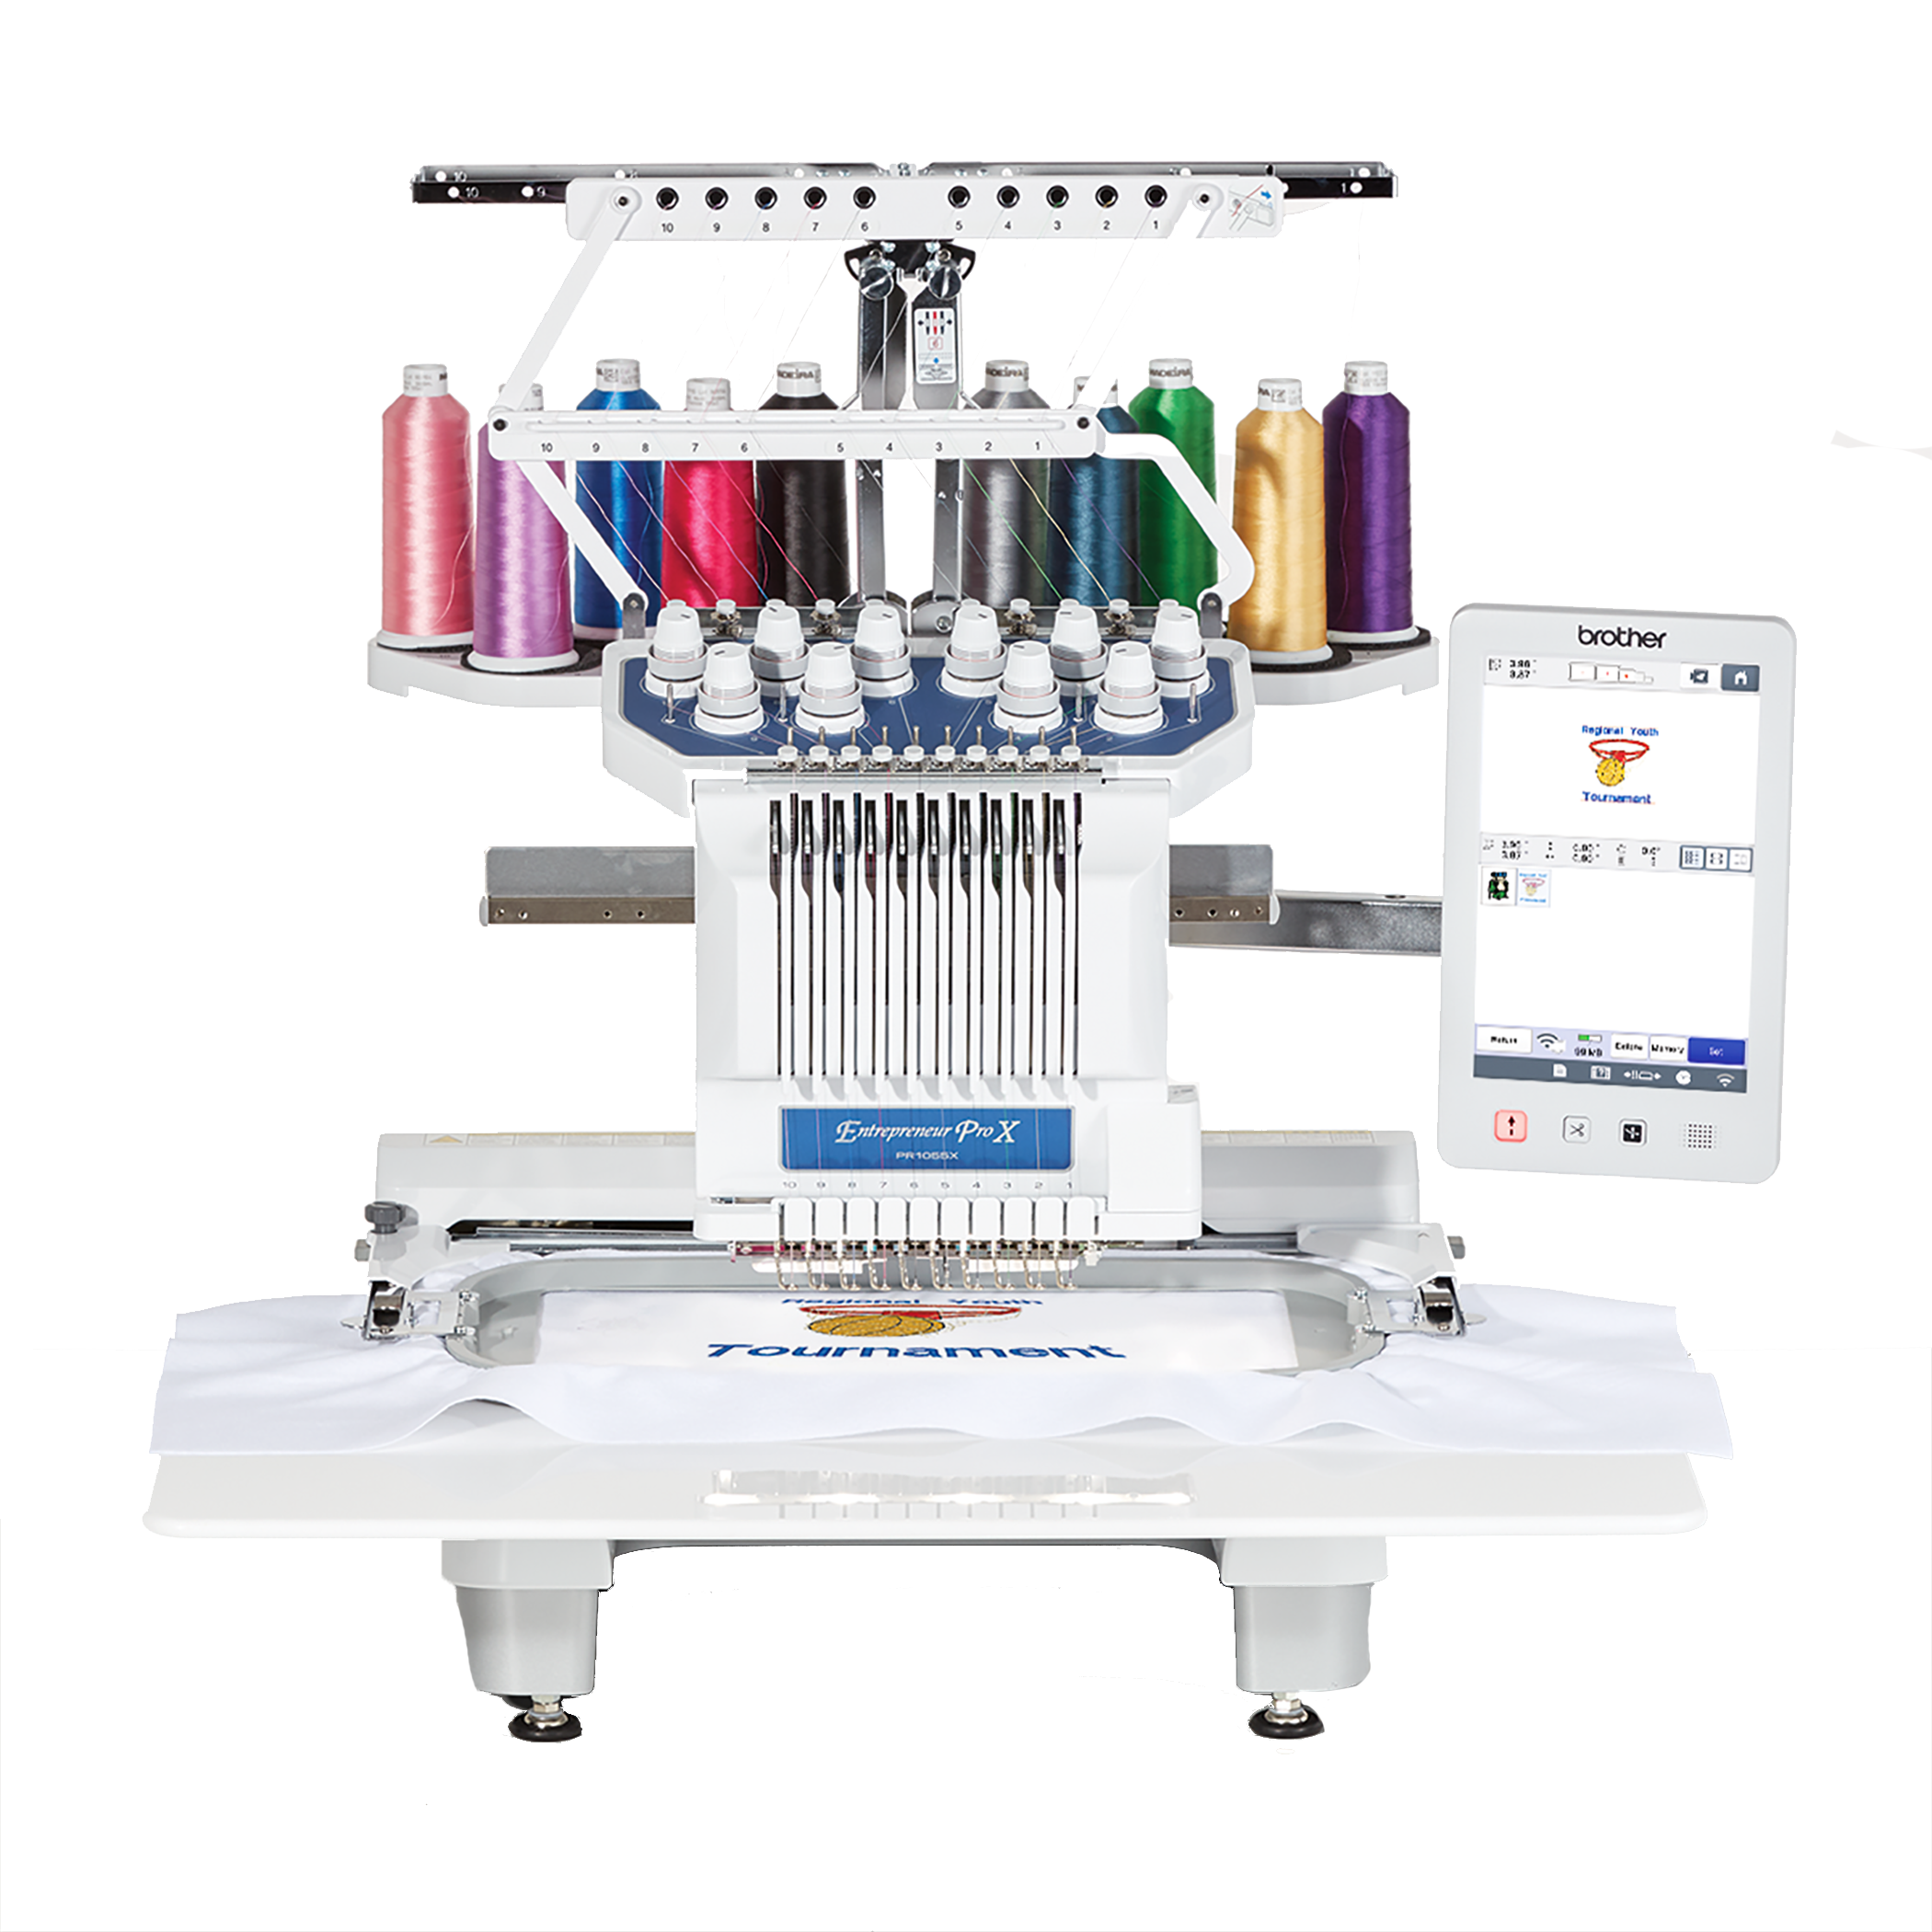 Multi-Needle Embroidery Machines - Brother